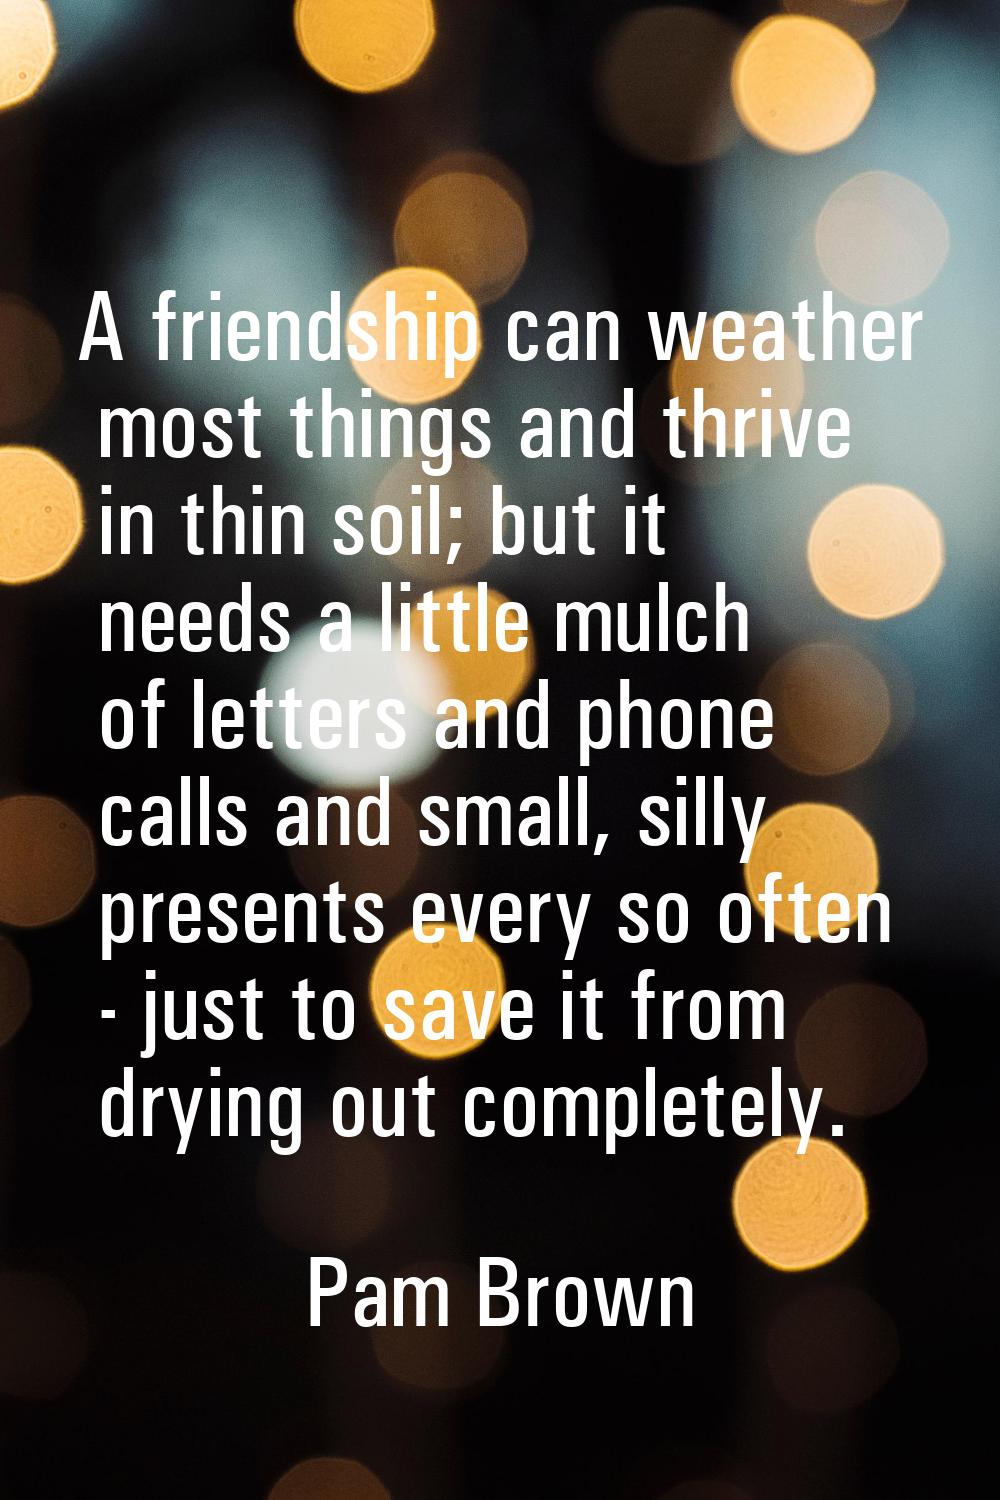 A friendship can weather most things and thrive in thin soil; but it needs a little mulch of letter